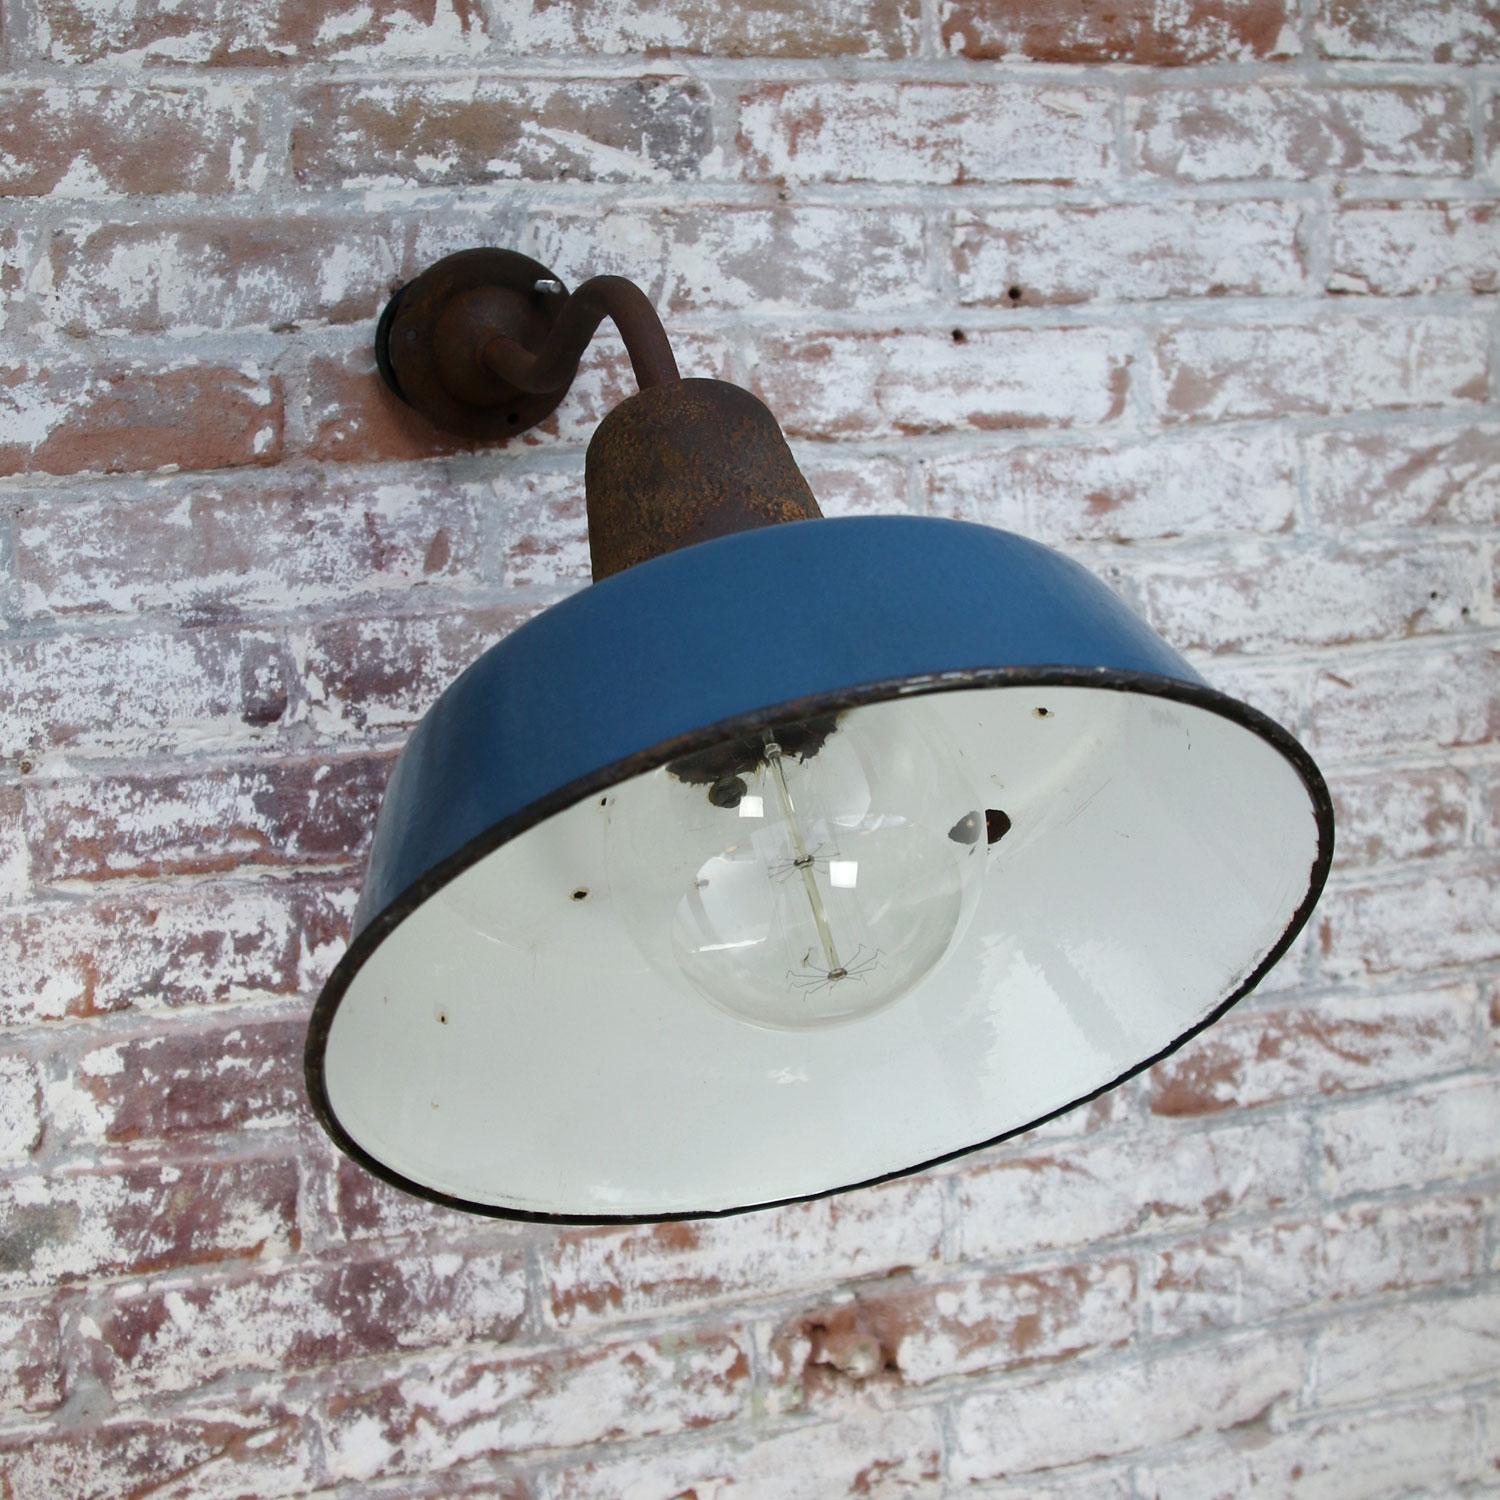 Blue enamel industrial wall light. White enamel interior, cast iron top and arm and wall piece.
Diameter cast iron wall mount: 9 cm, three holes to secure.

Weight: 6.7 kg / 14.8 lb

Priced per individual item. All lamps have been made suitable